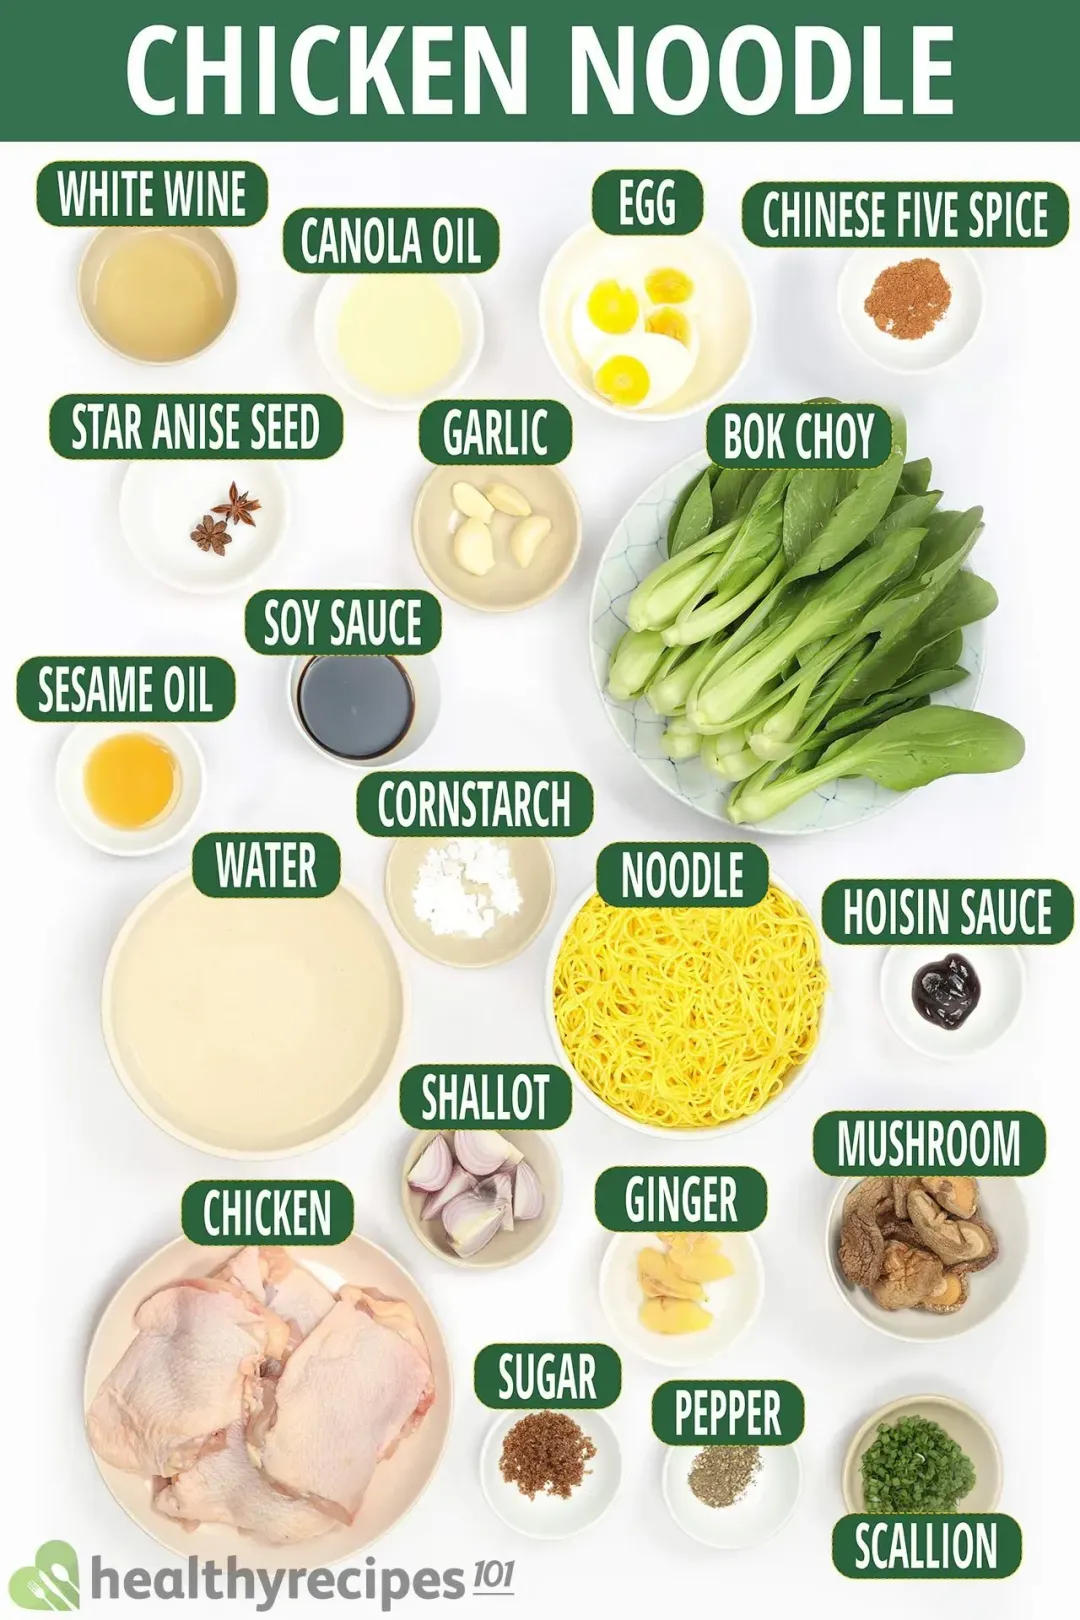 Ingredients for Chicken Noodle